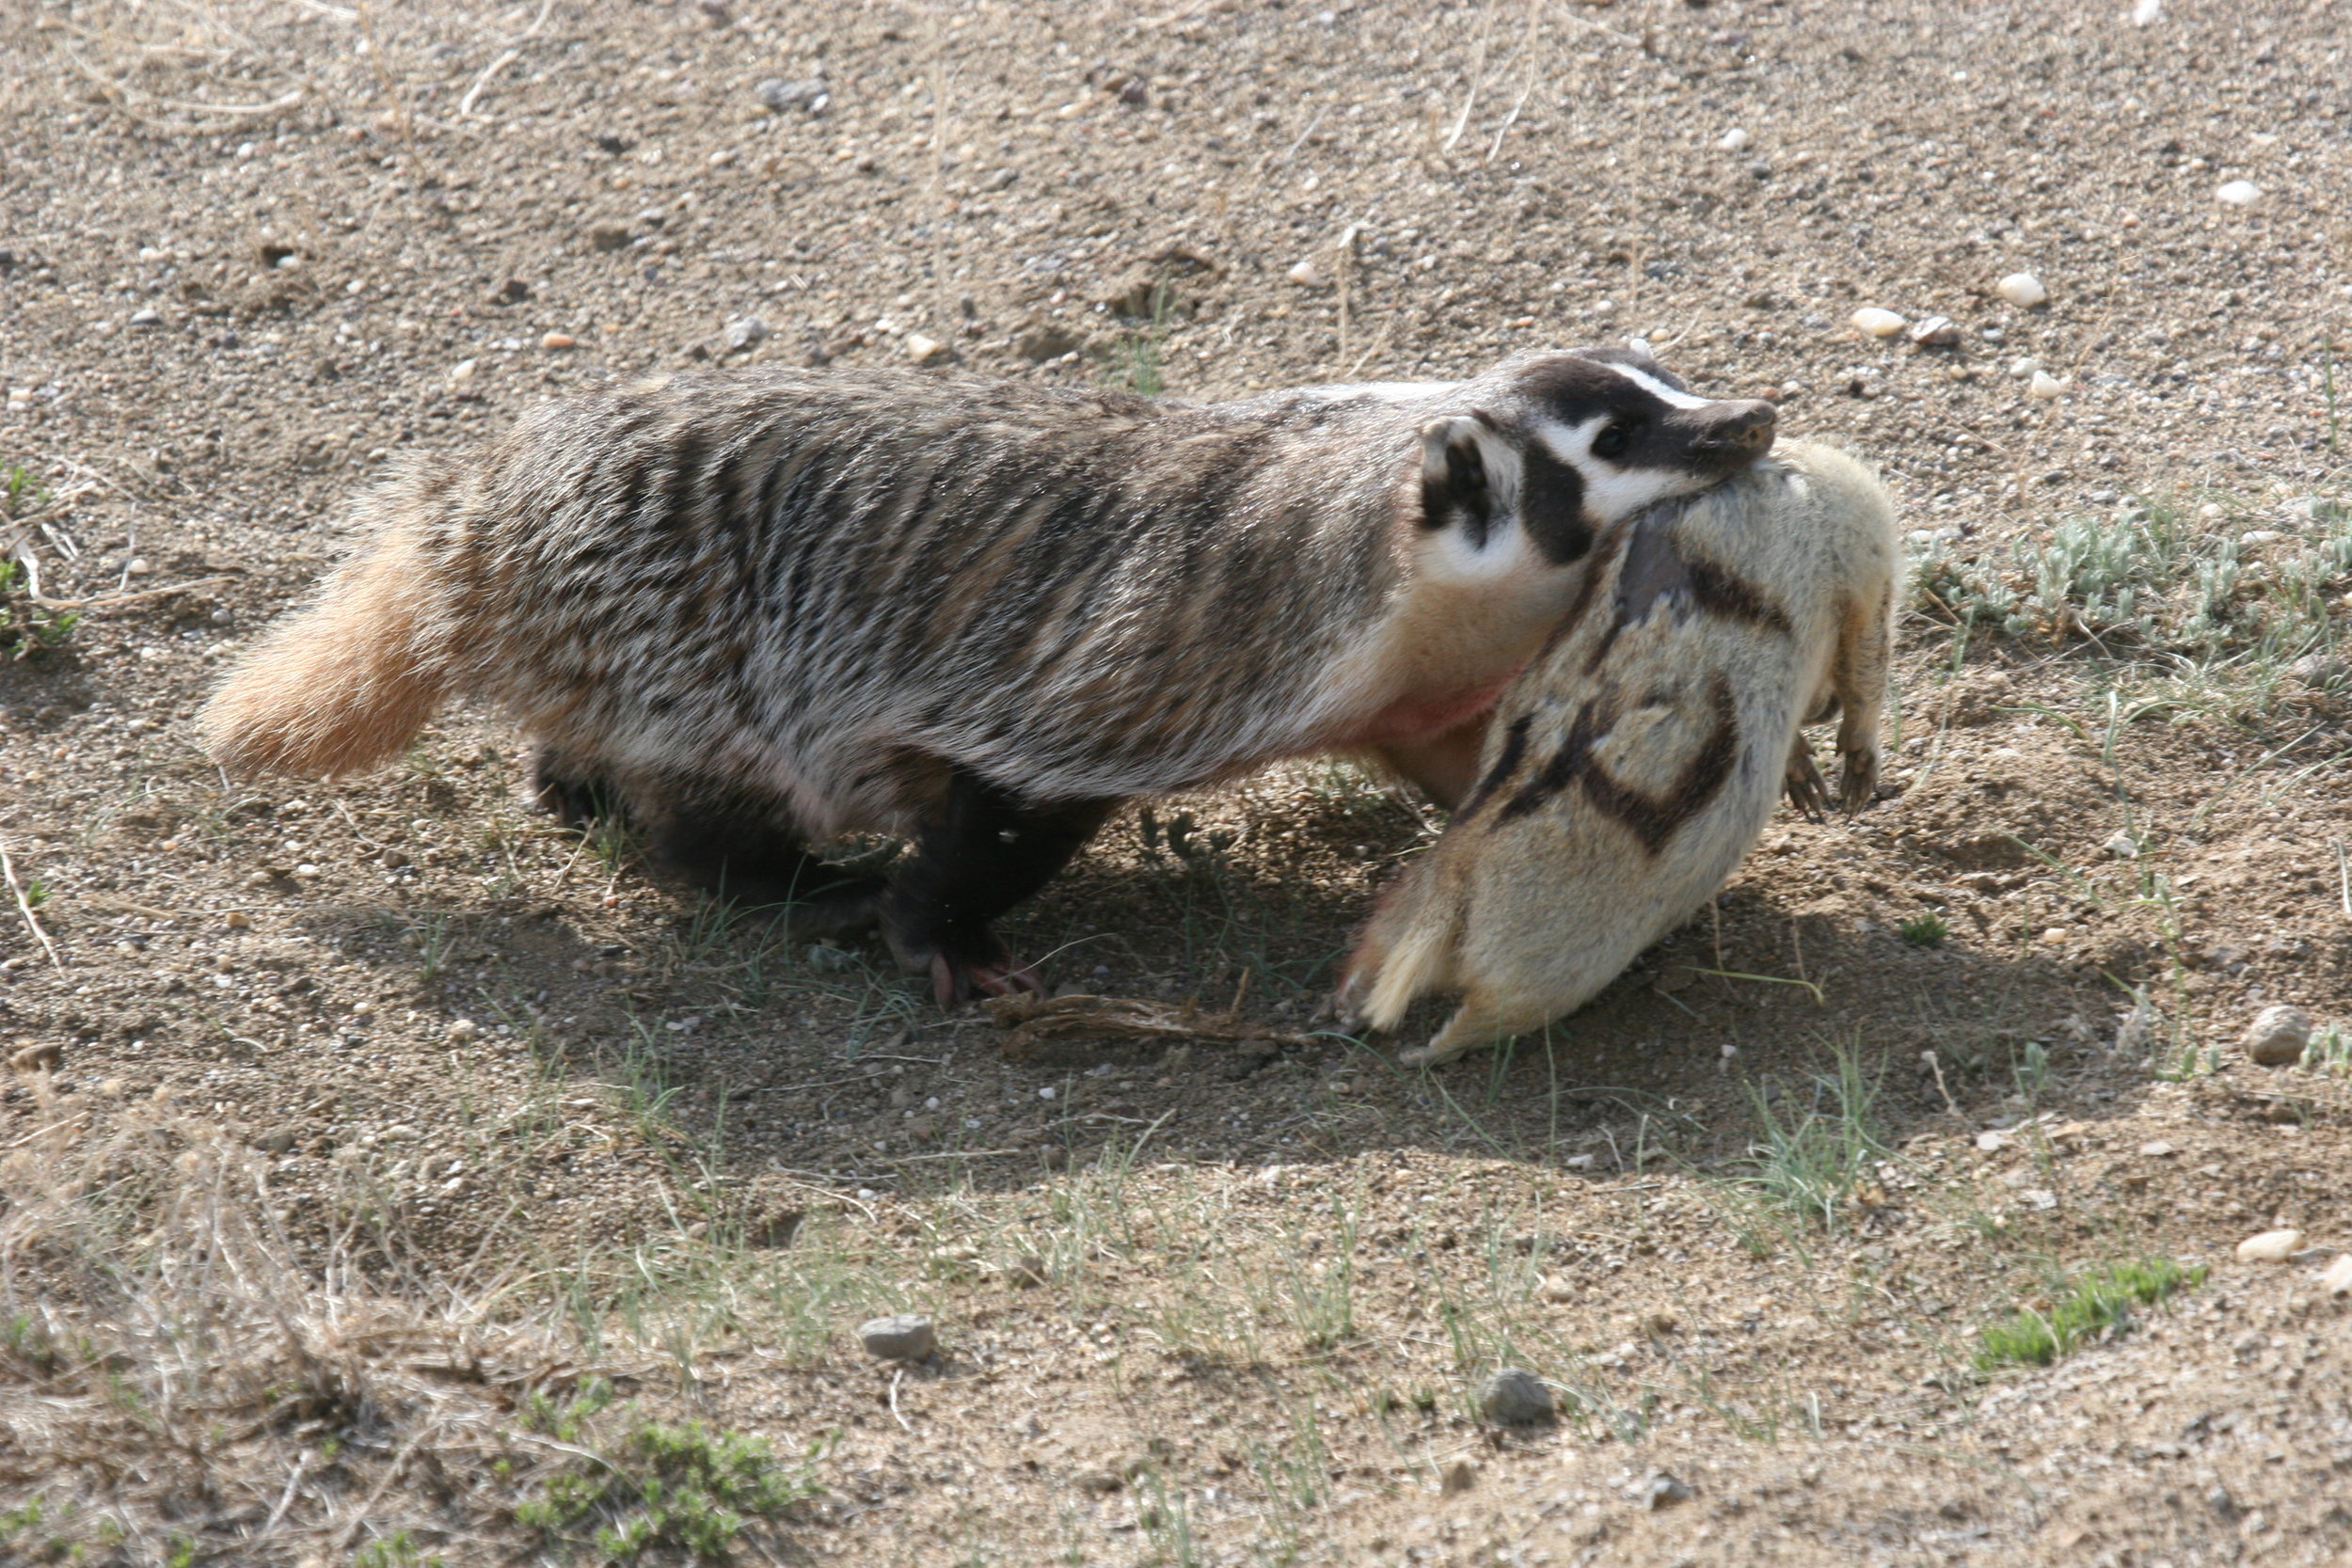  A badger comes home with an adult prairie dog in her jaws.  ©John Hoogland 2012  